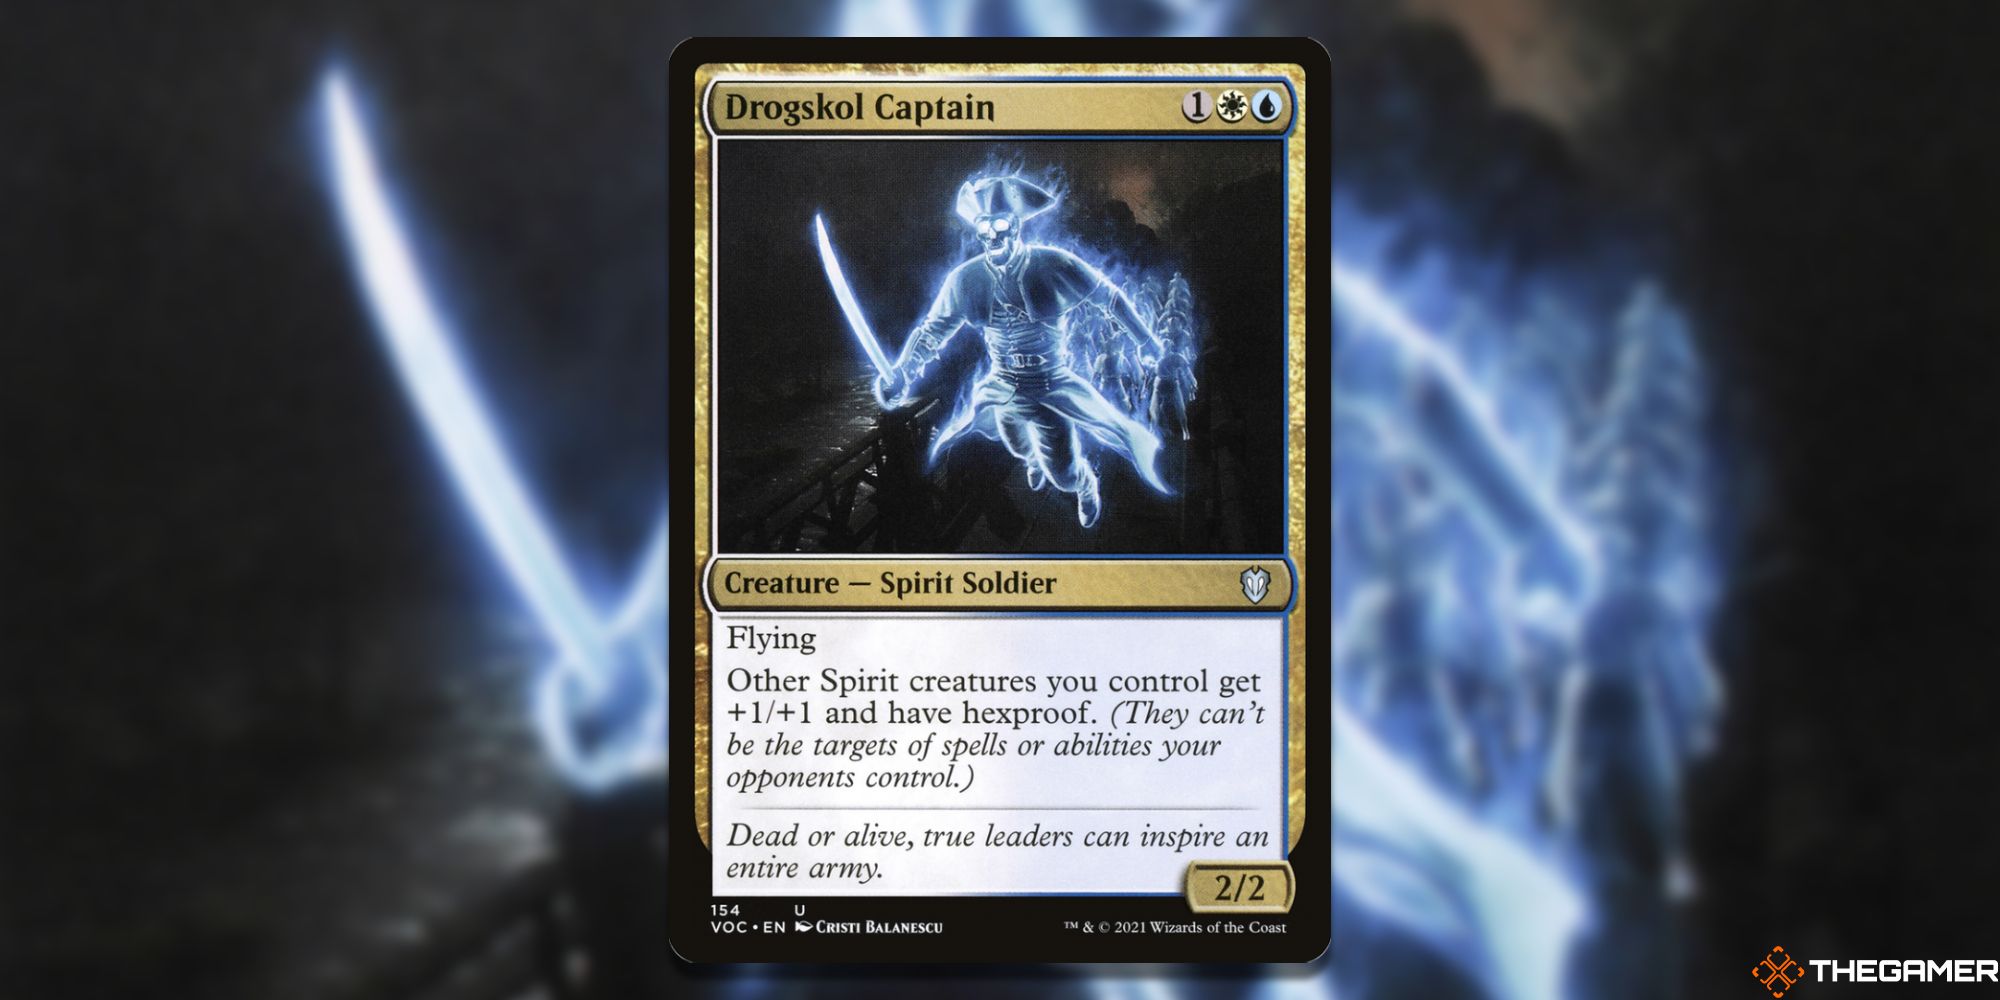 Image of the Drogskol Captain card in Magic: The Gathering, with art by Cristi Balanescu